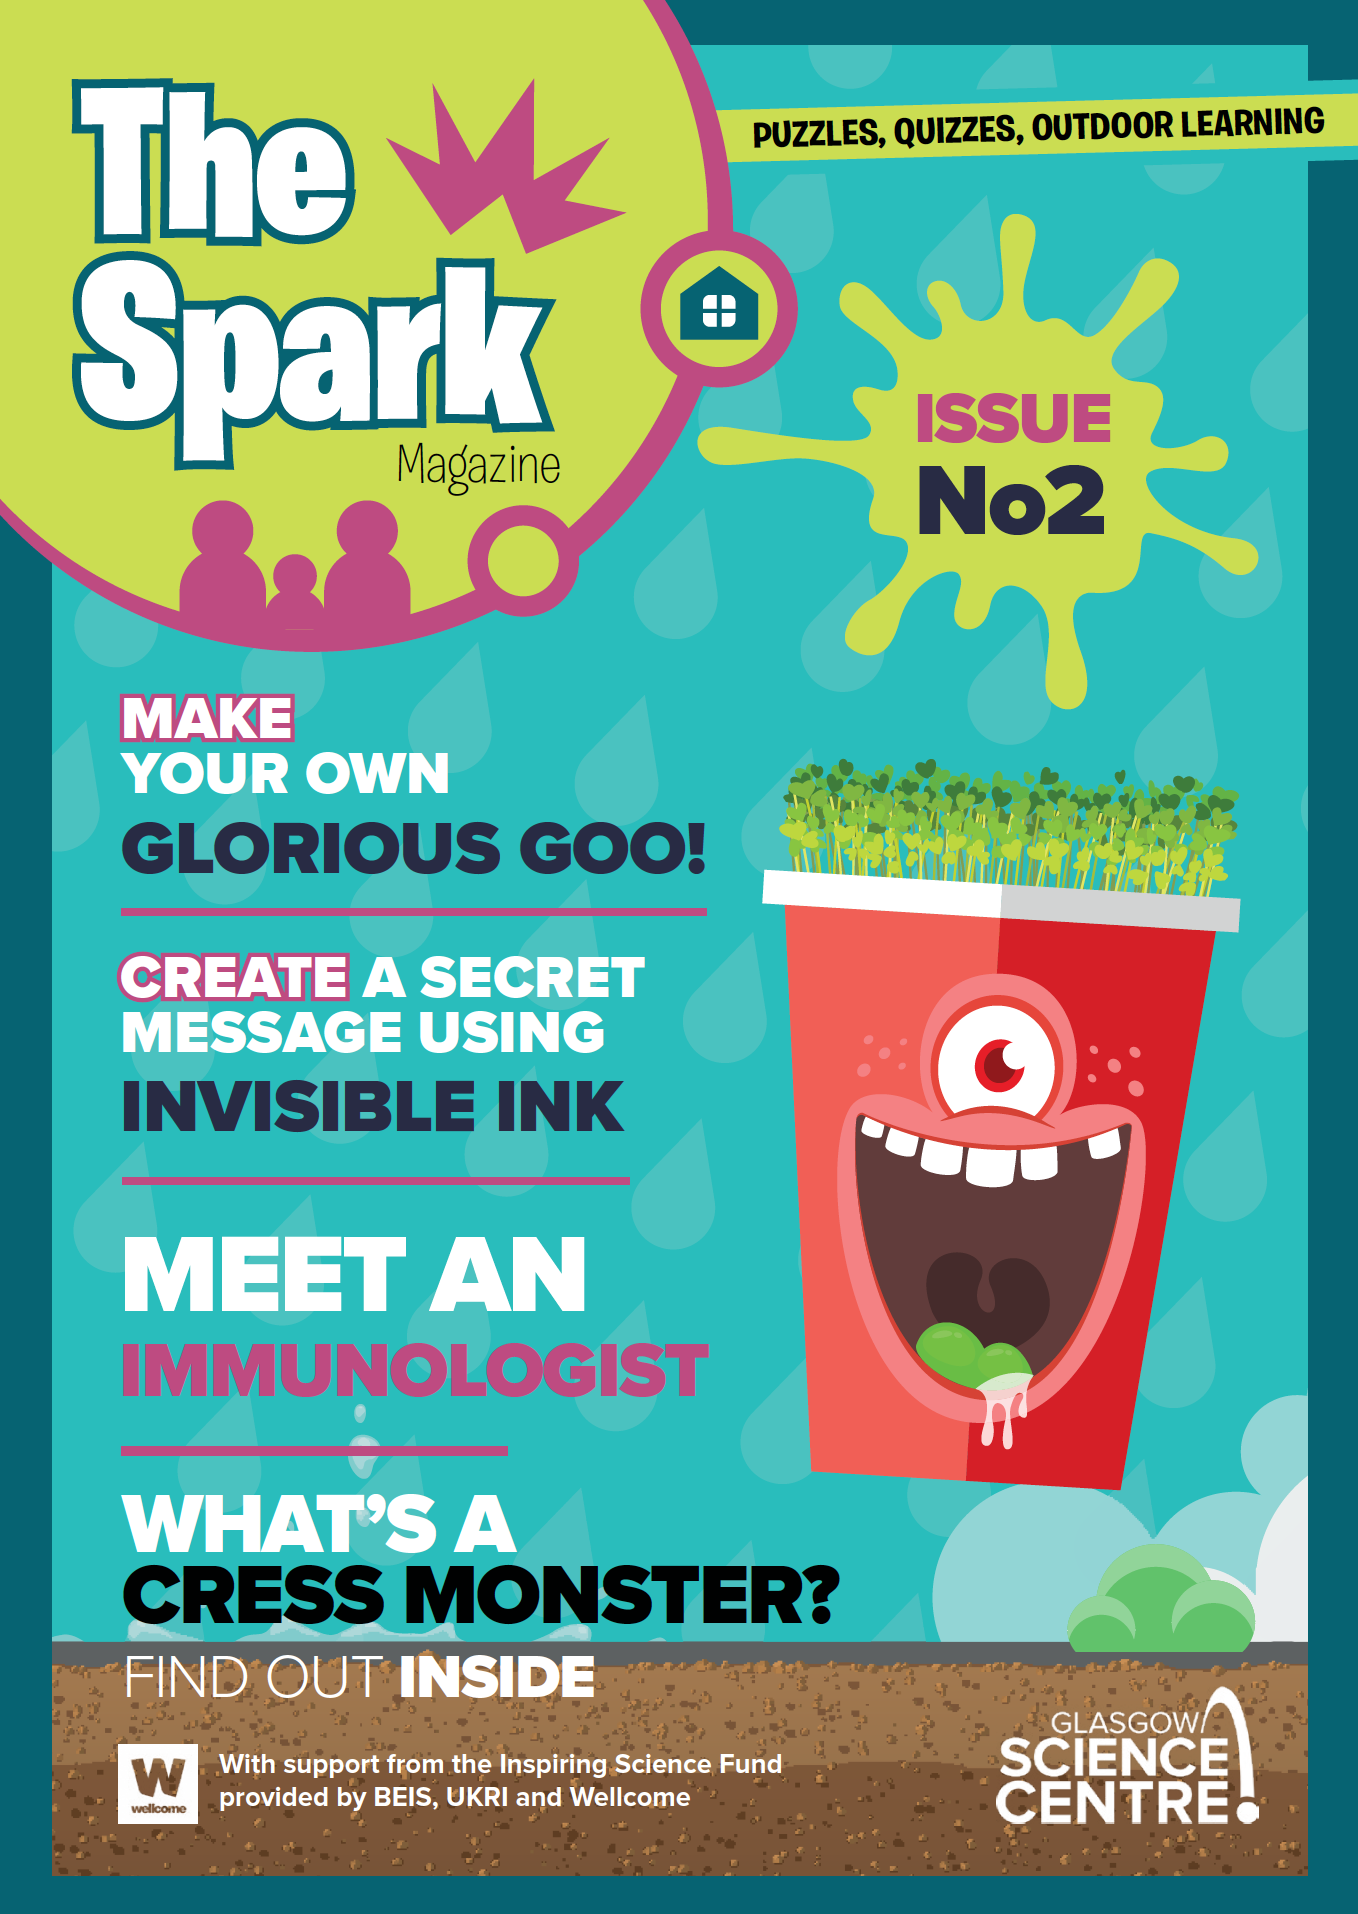 The front cover of The Spark Issue 2